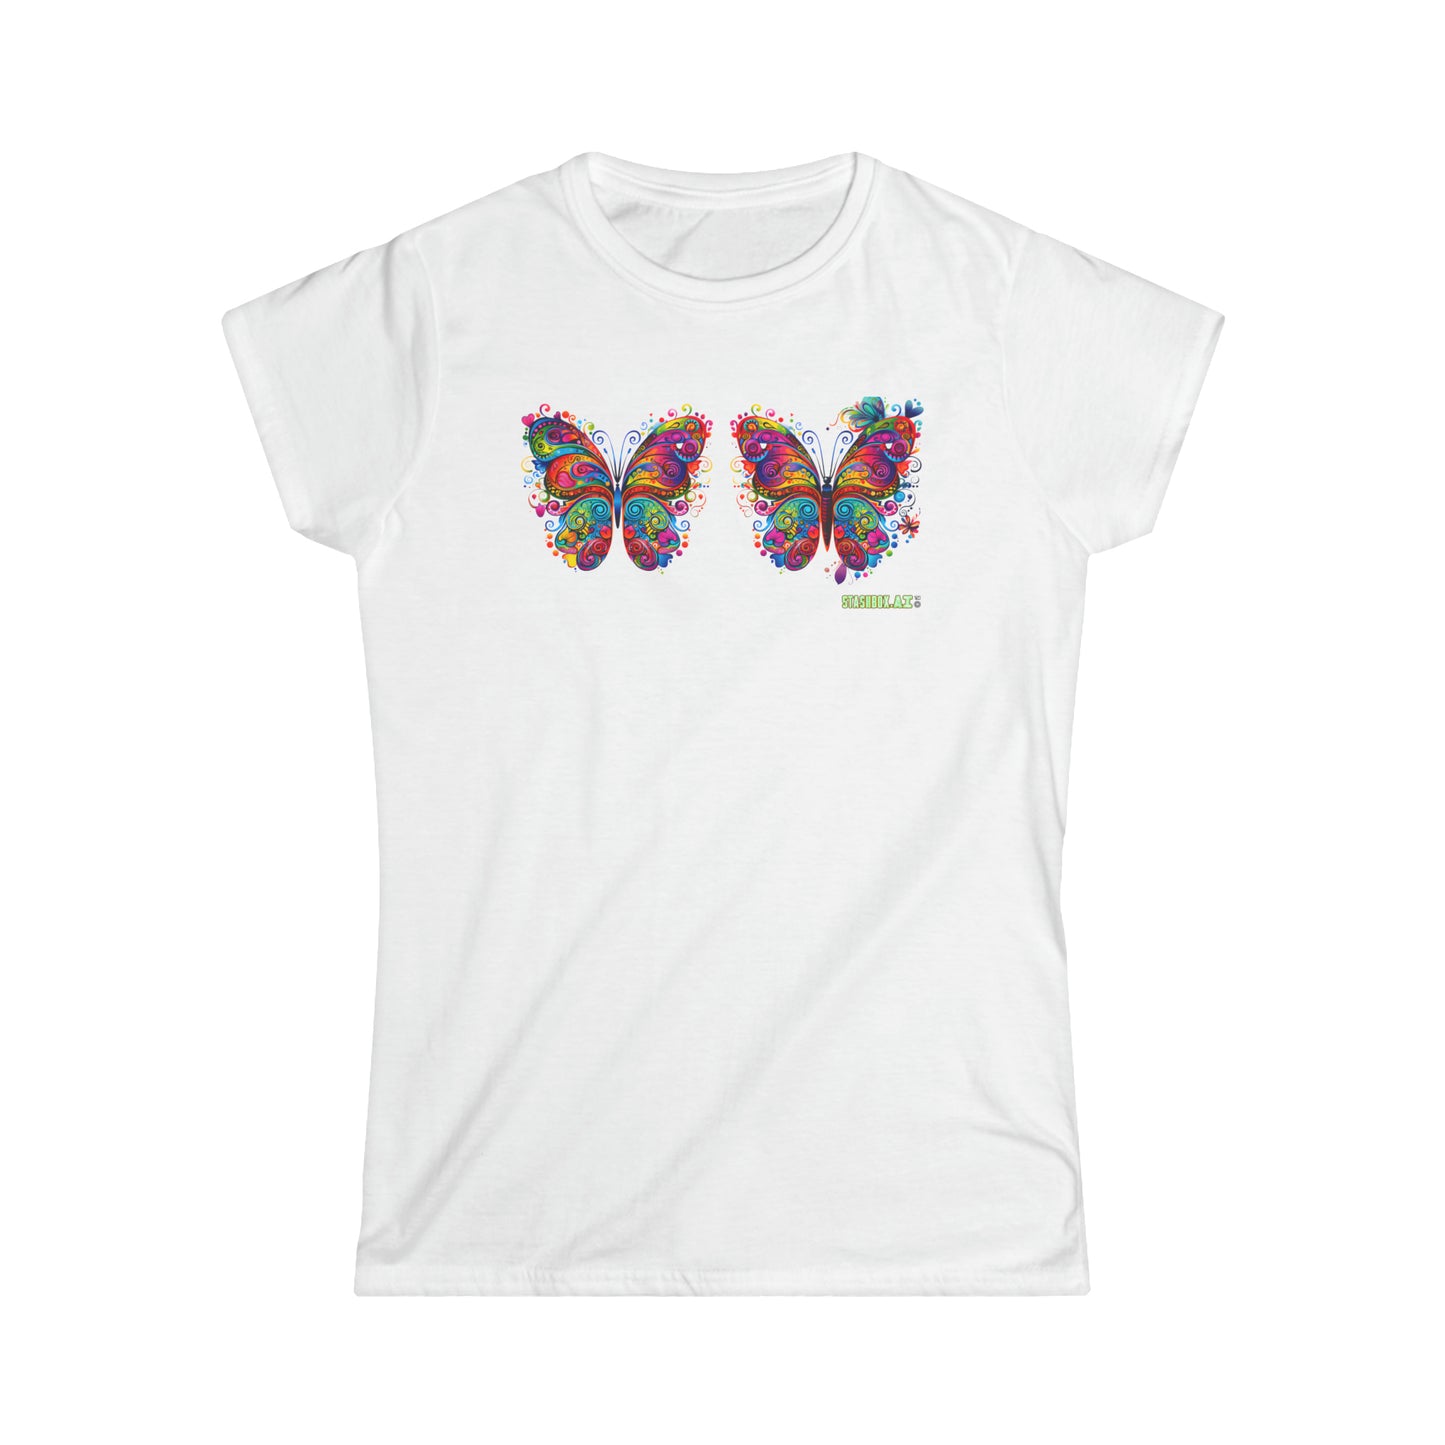 Women's Softstyle Tshirt Two Butterflies 001